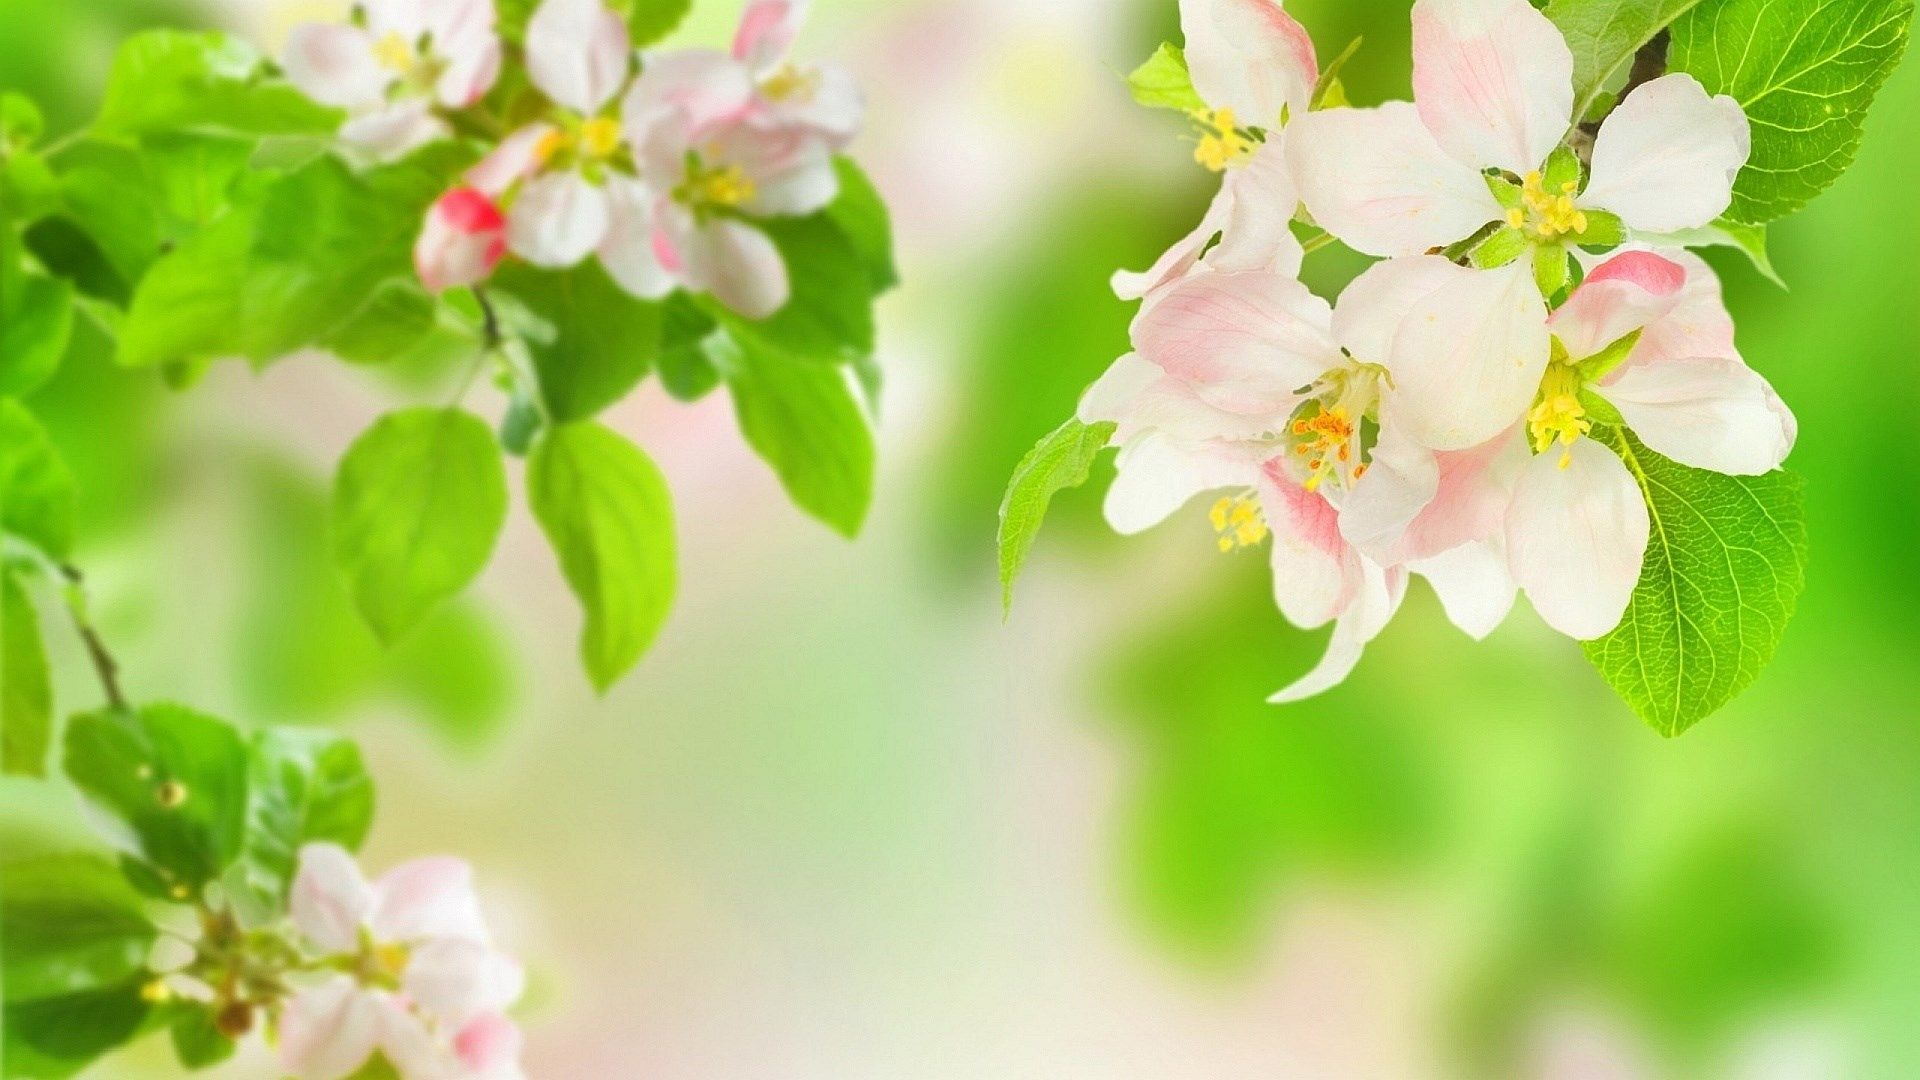 1920x1080 spring high resolution wallpapers widescreen | Spring flowers wallpaper, Flower wallpaper, Pictures of spring flowers